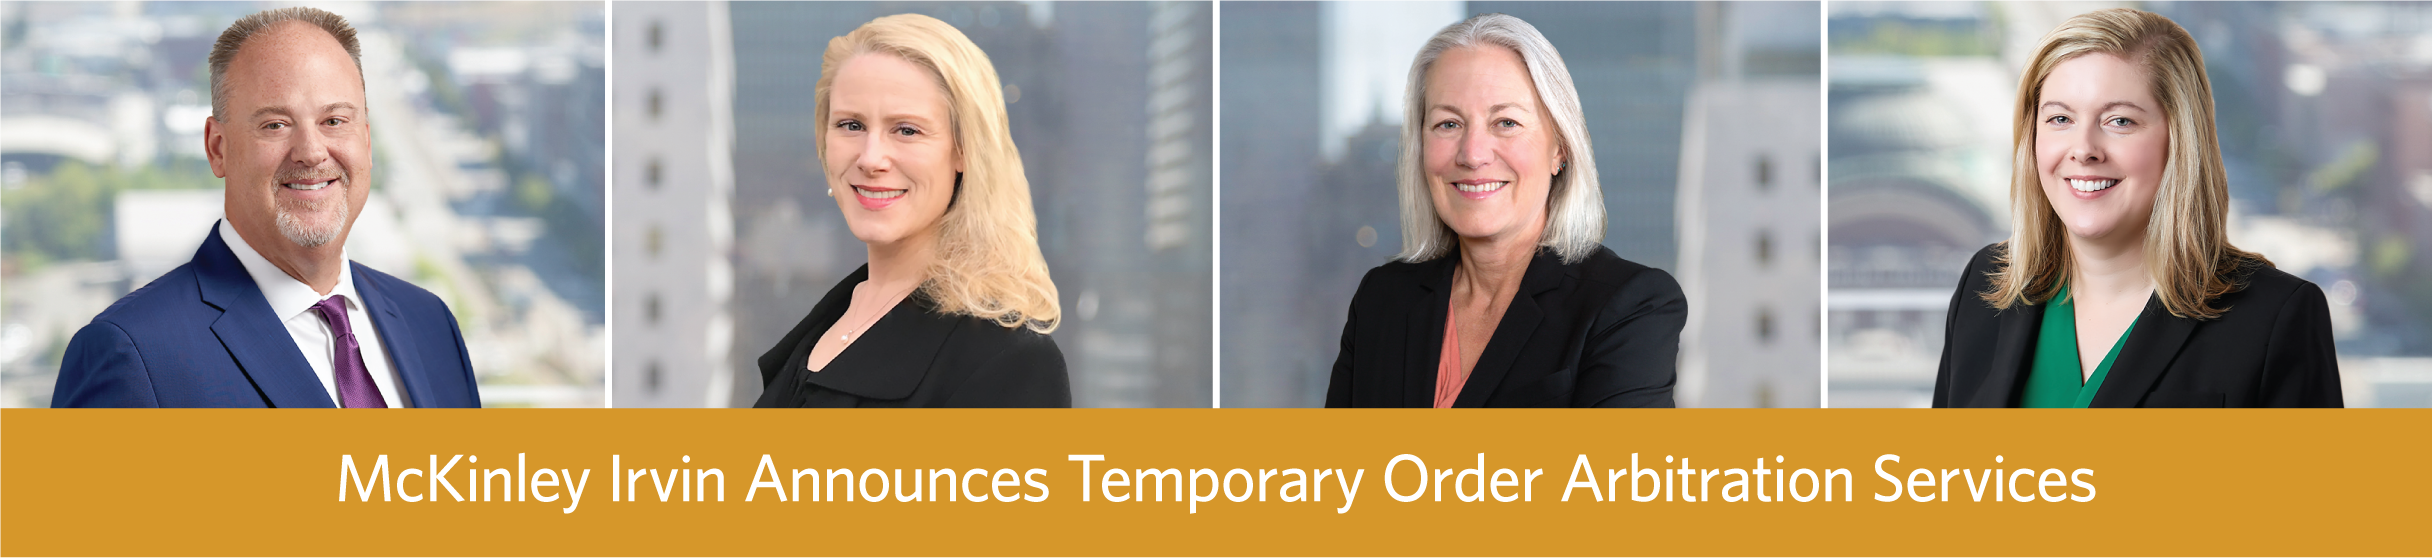 Announcing Family Law Temporary Order Arbitration Services